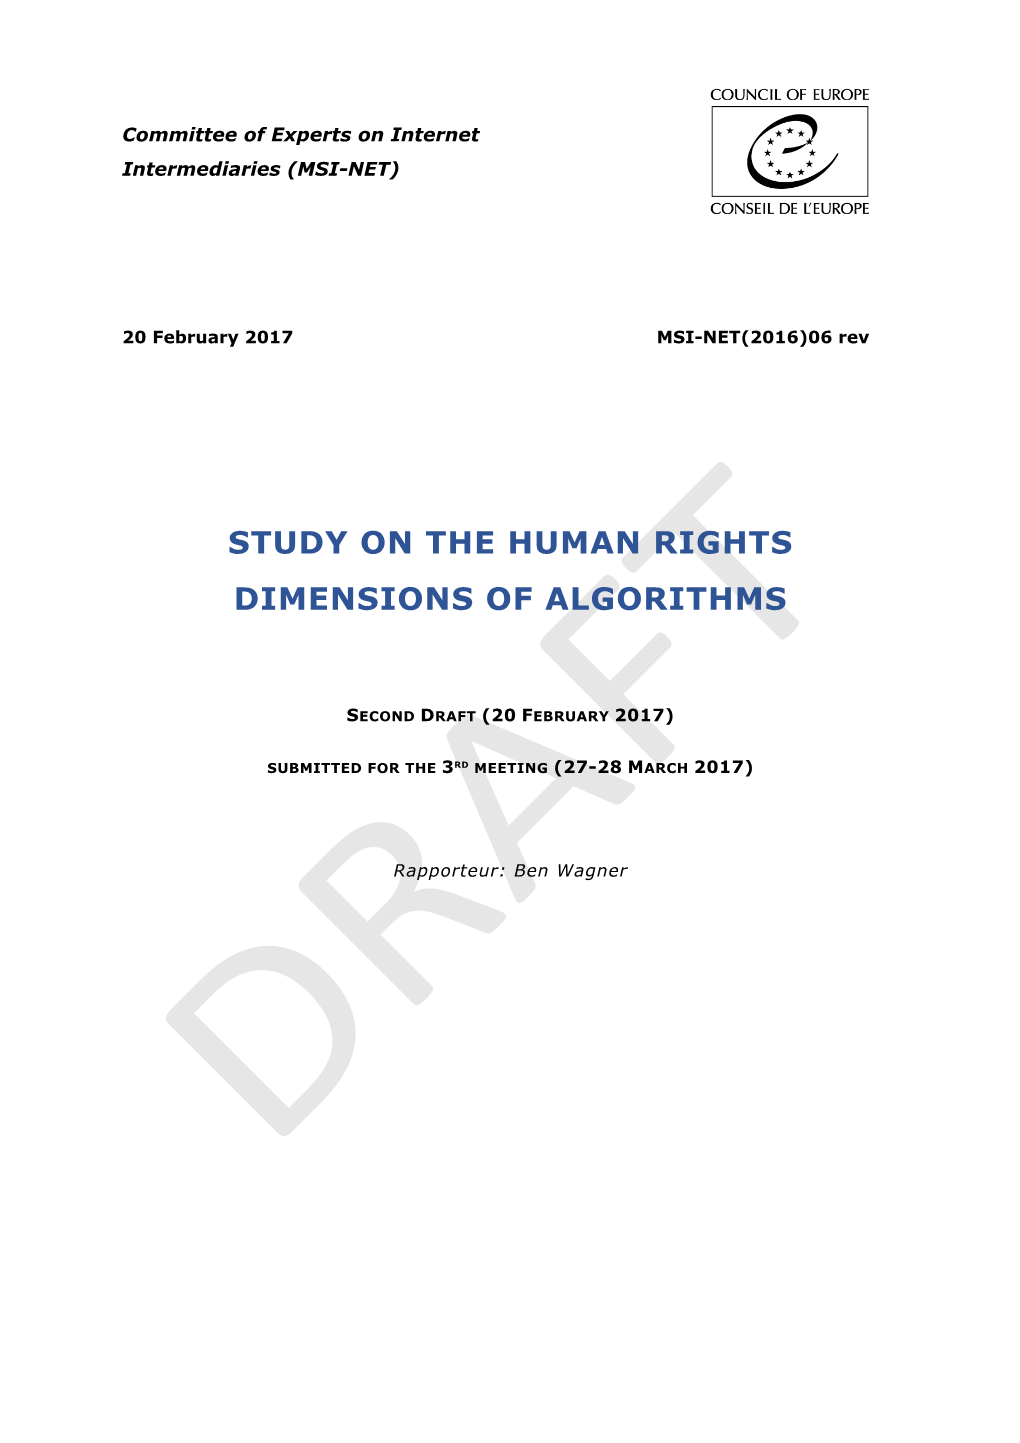 Study on the Human Rights Dimensions of Algorithms